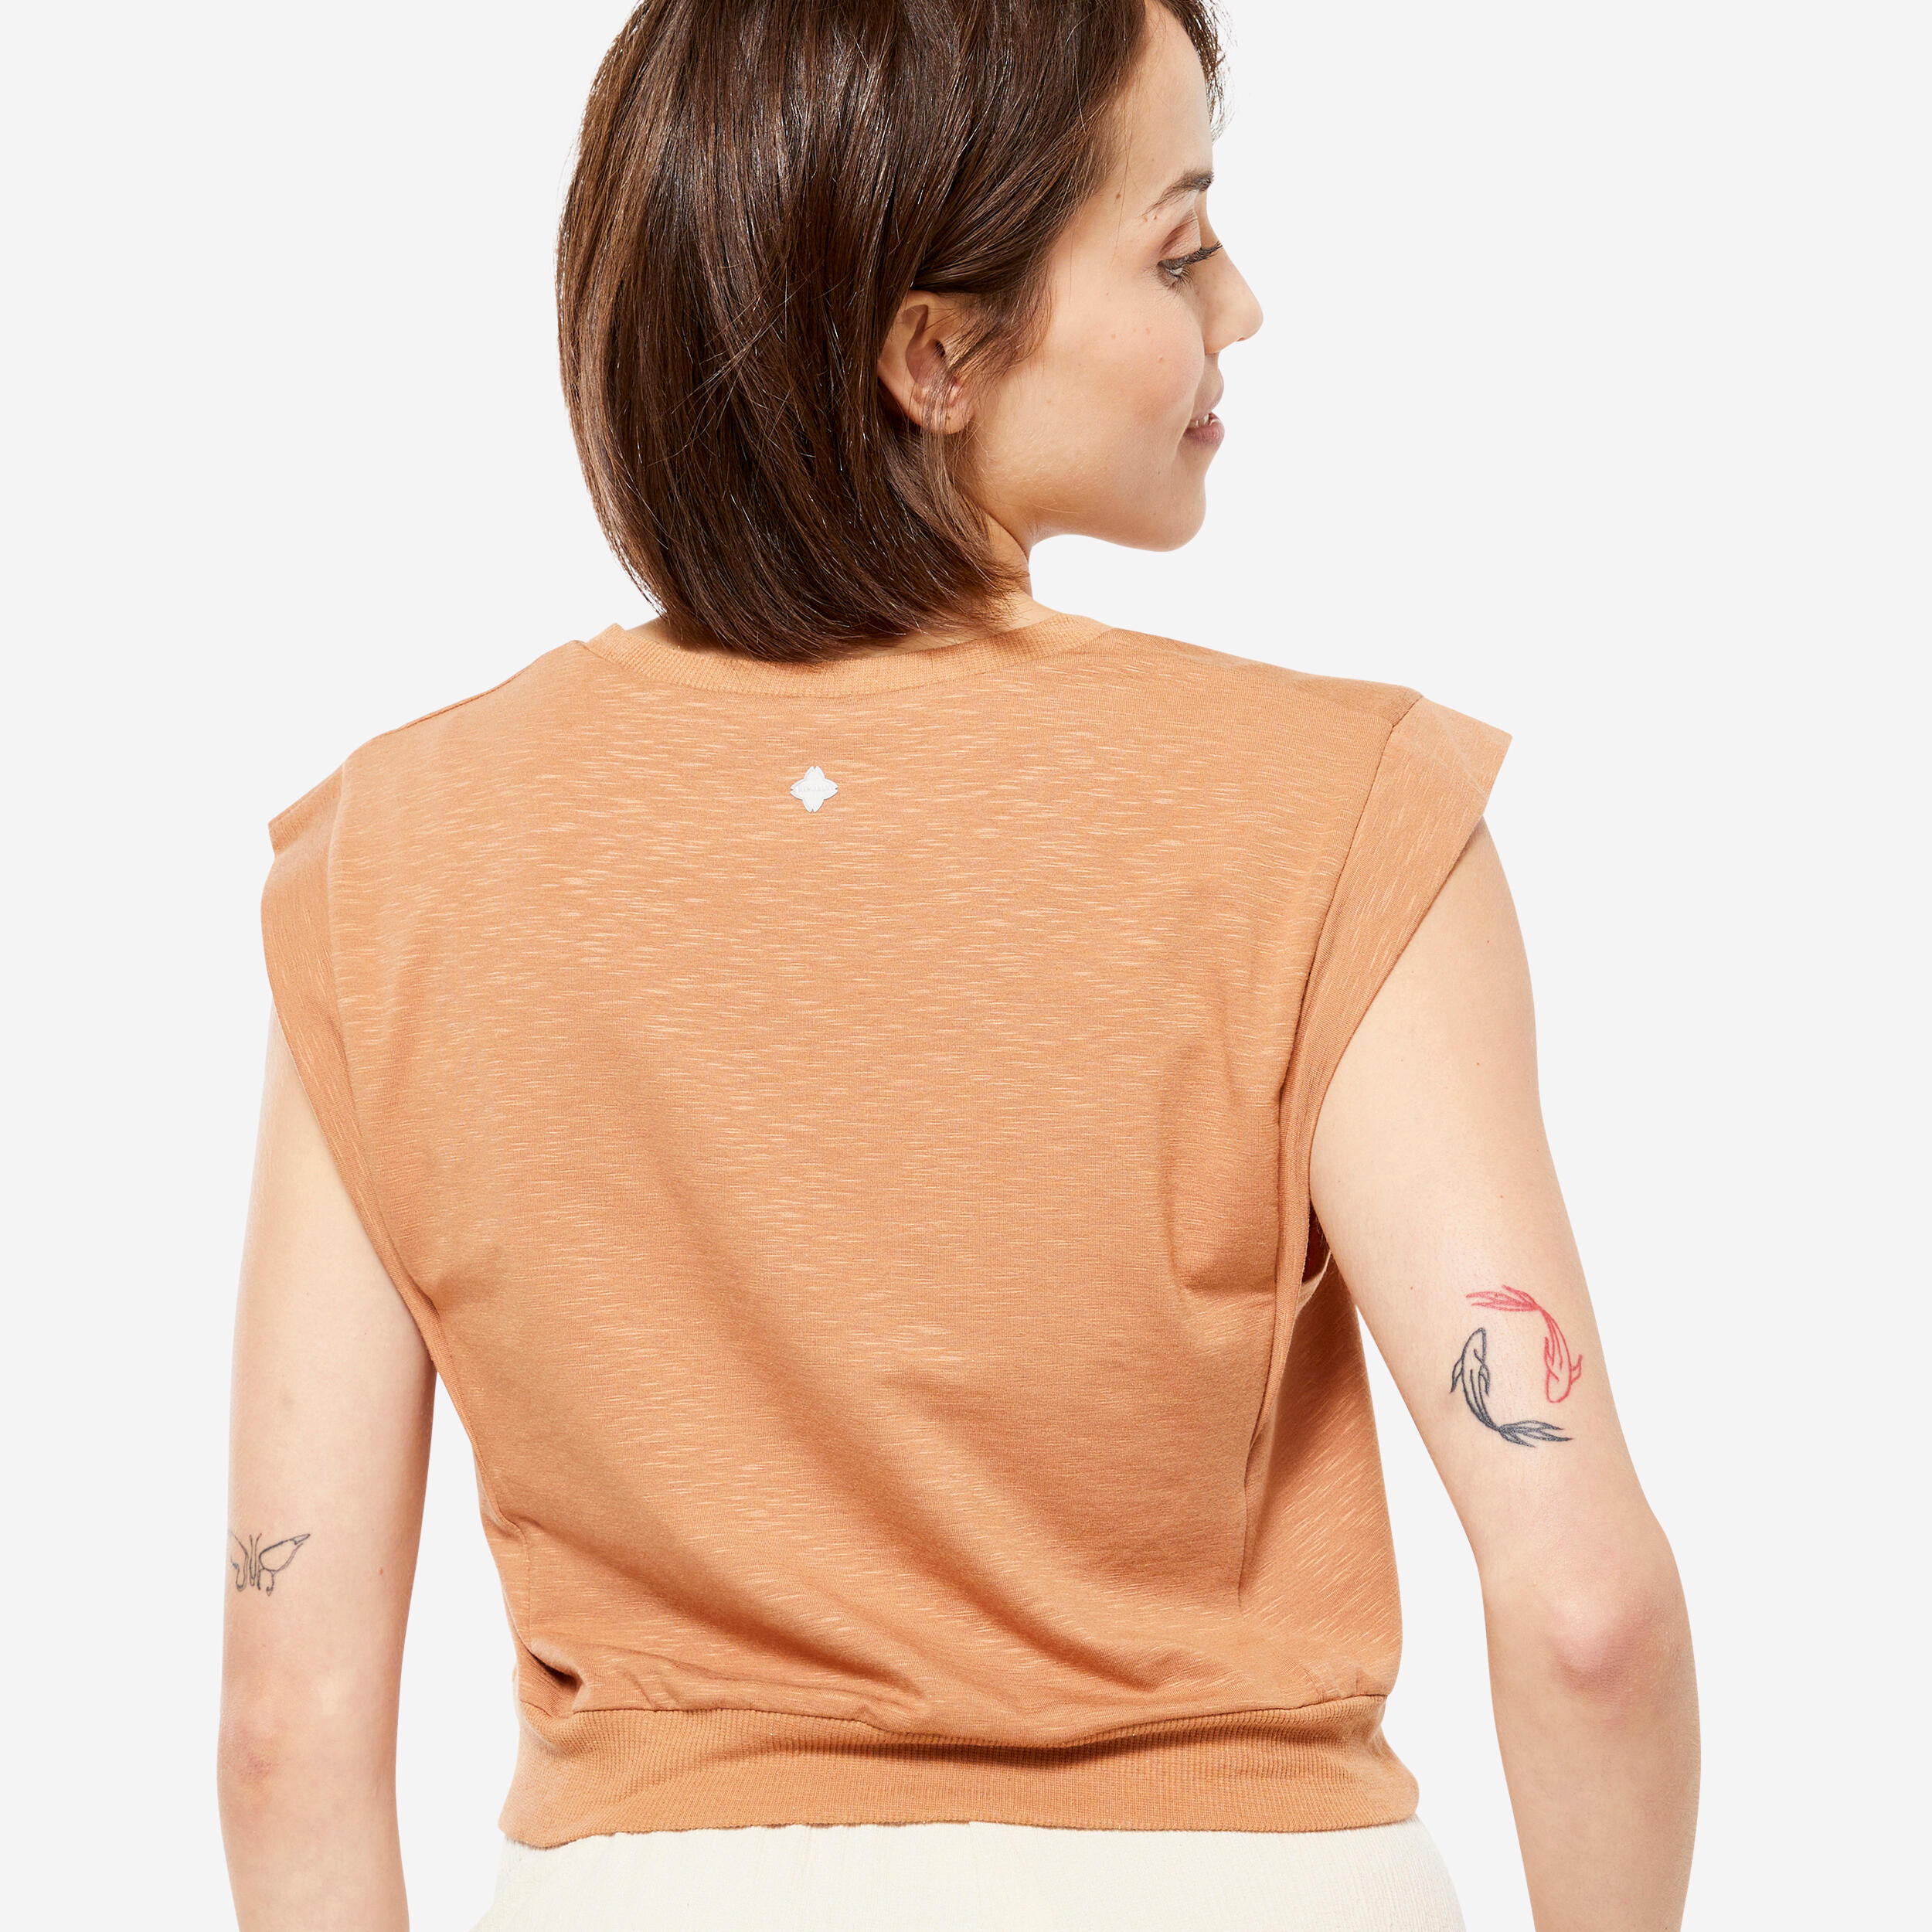 Loose Cropped Yoga T-Shirt - Beige 6/6